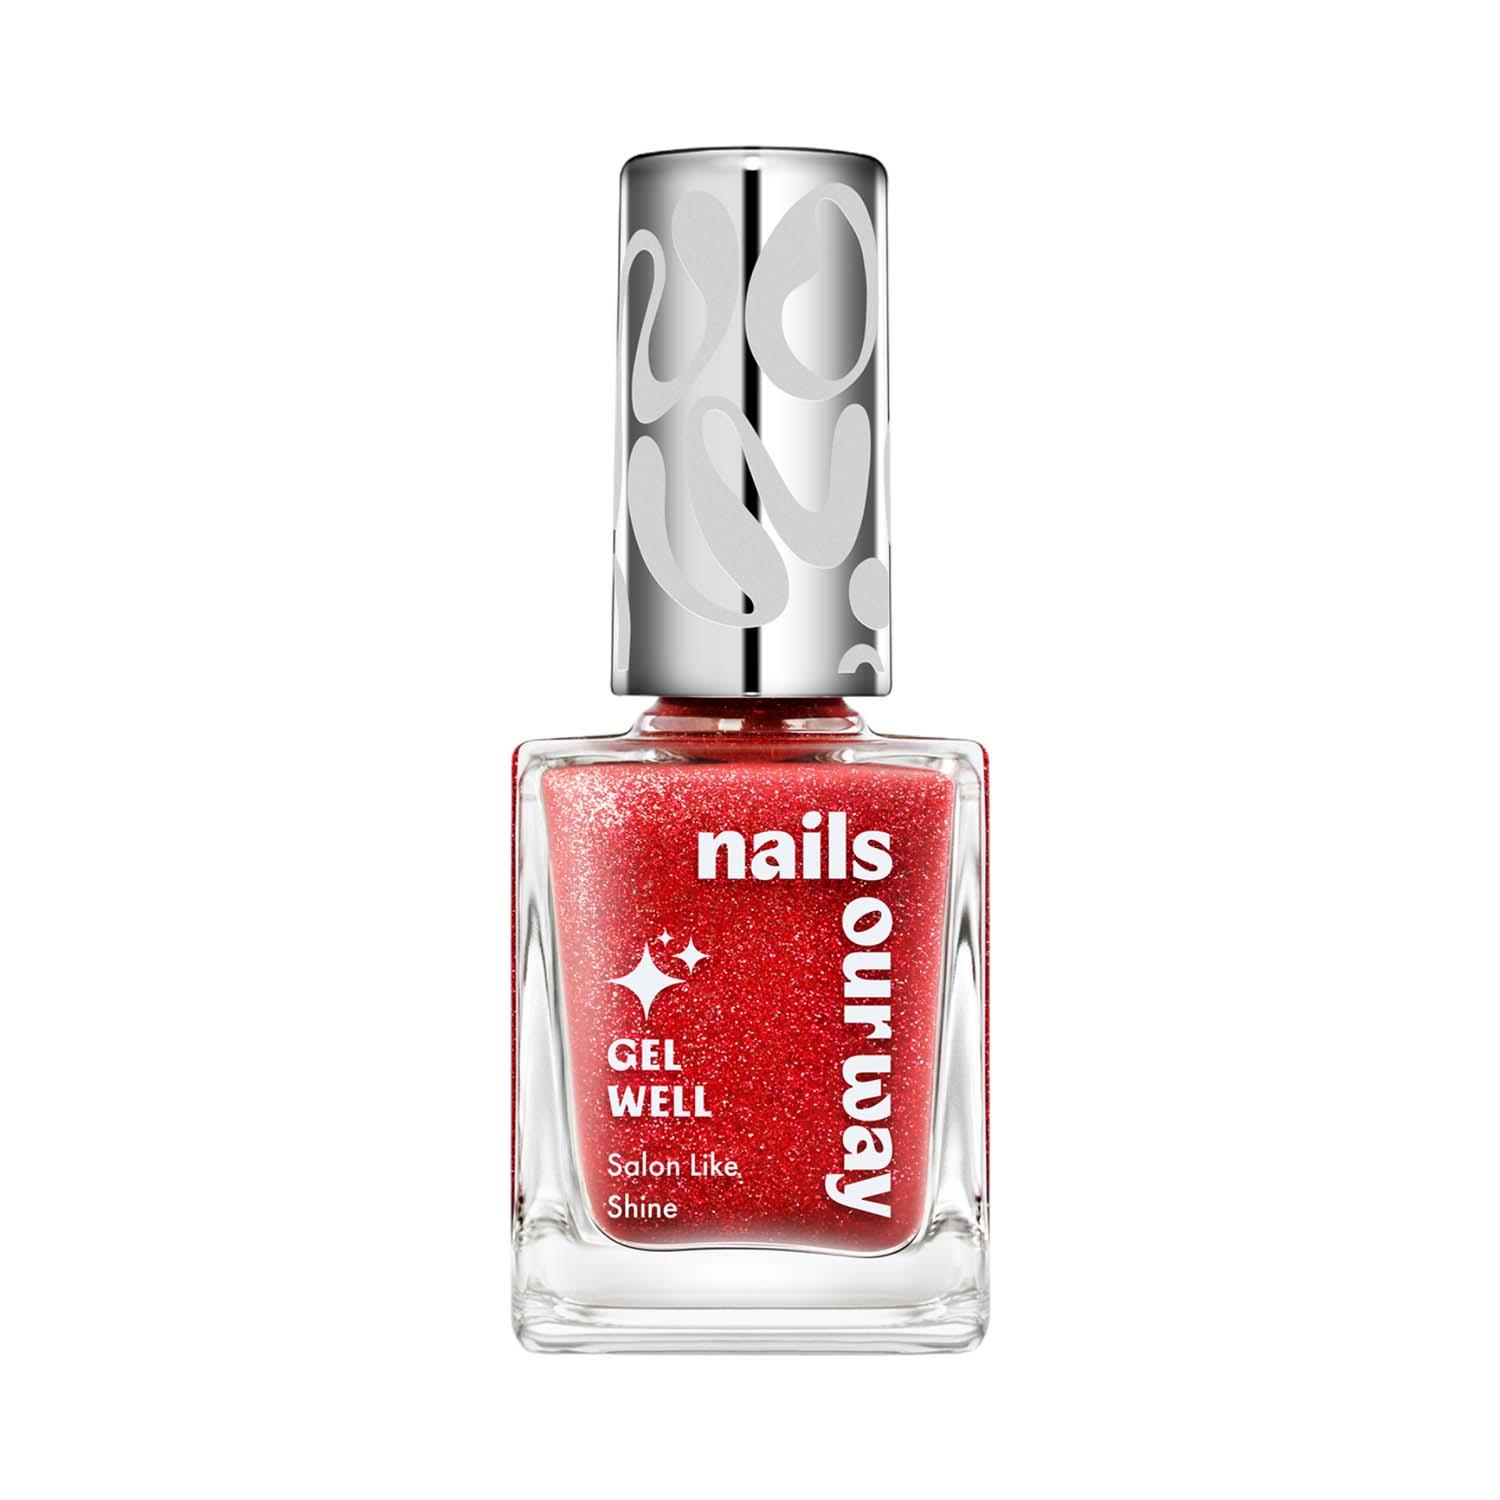 Nails Our Way Gel Well Nail Enamel - 106 Merry (10 ml)